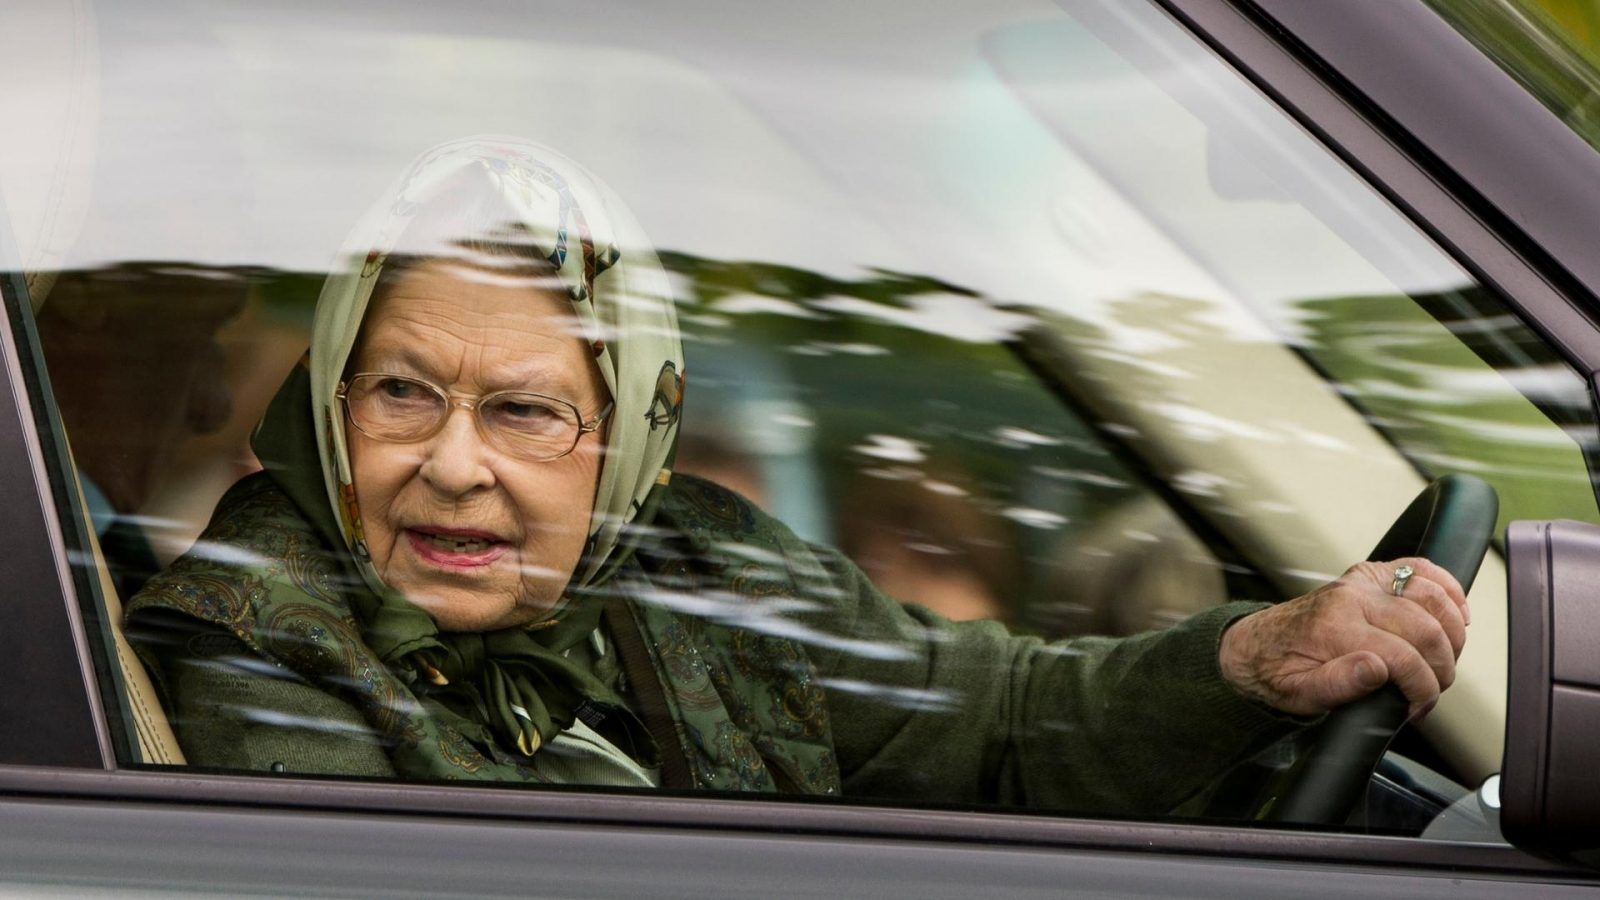 In Photo: Queen Elizabeth II's love of driving and luxury cars